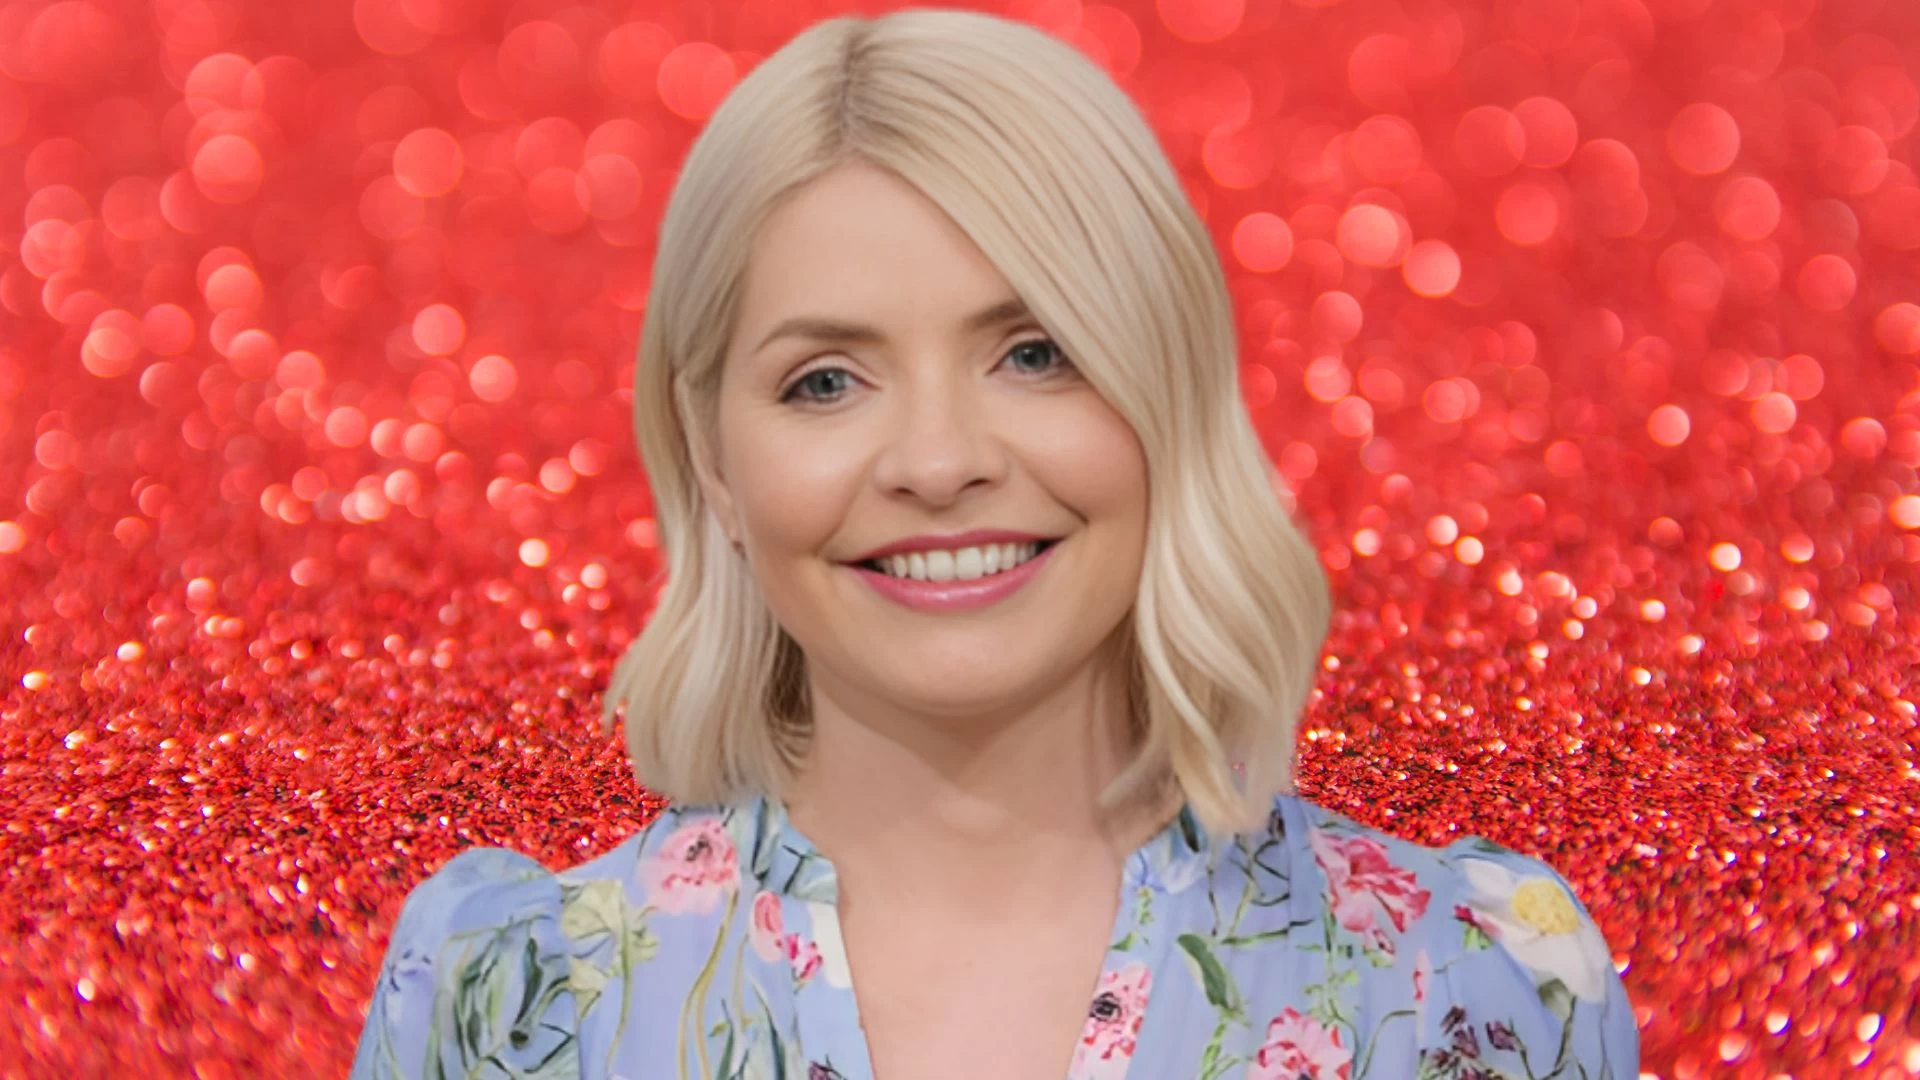 Holly Willoughby Ethnicity, What is Holly Willoughby's Ethnicity?